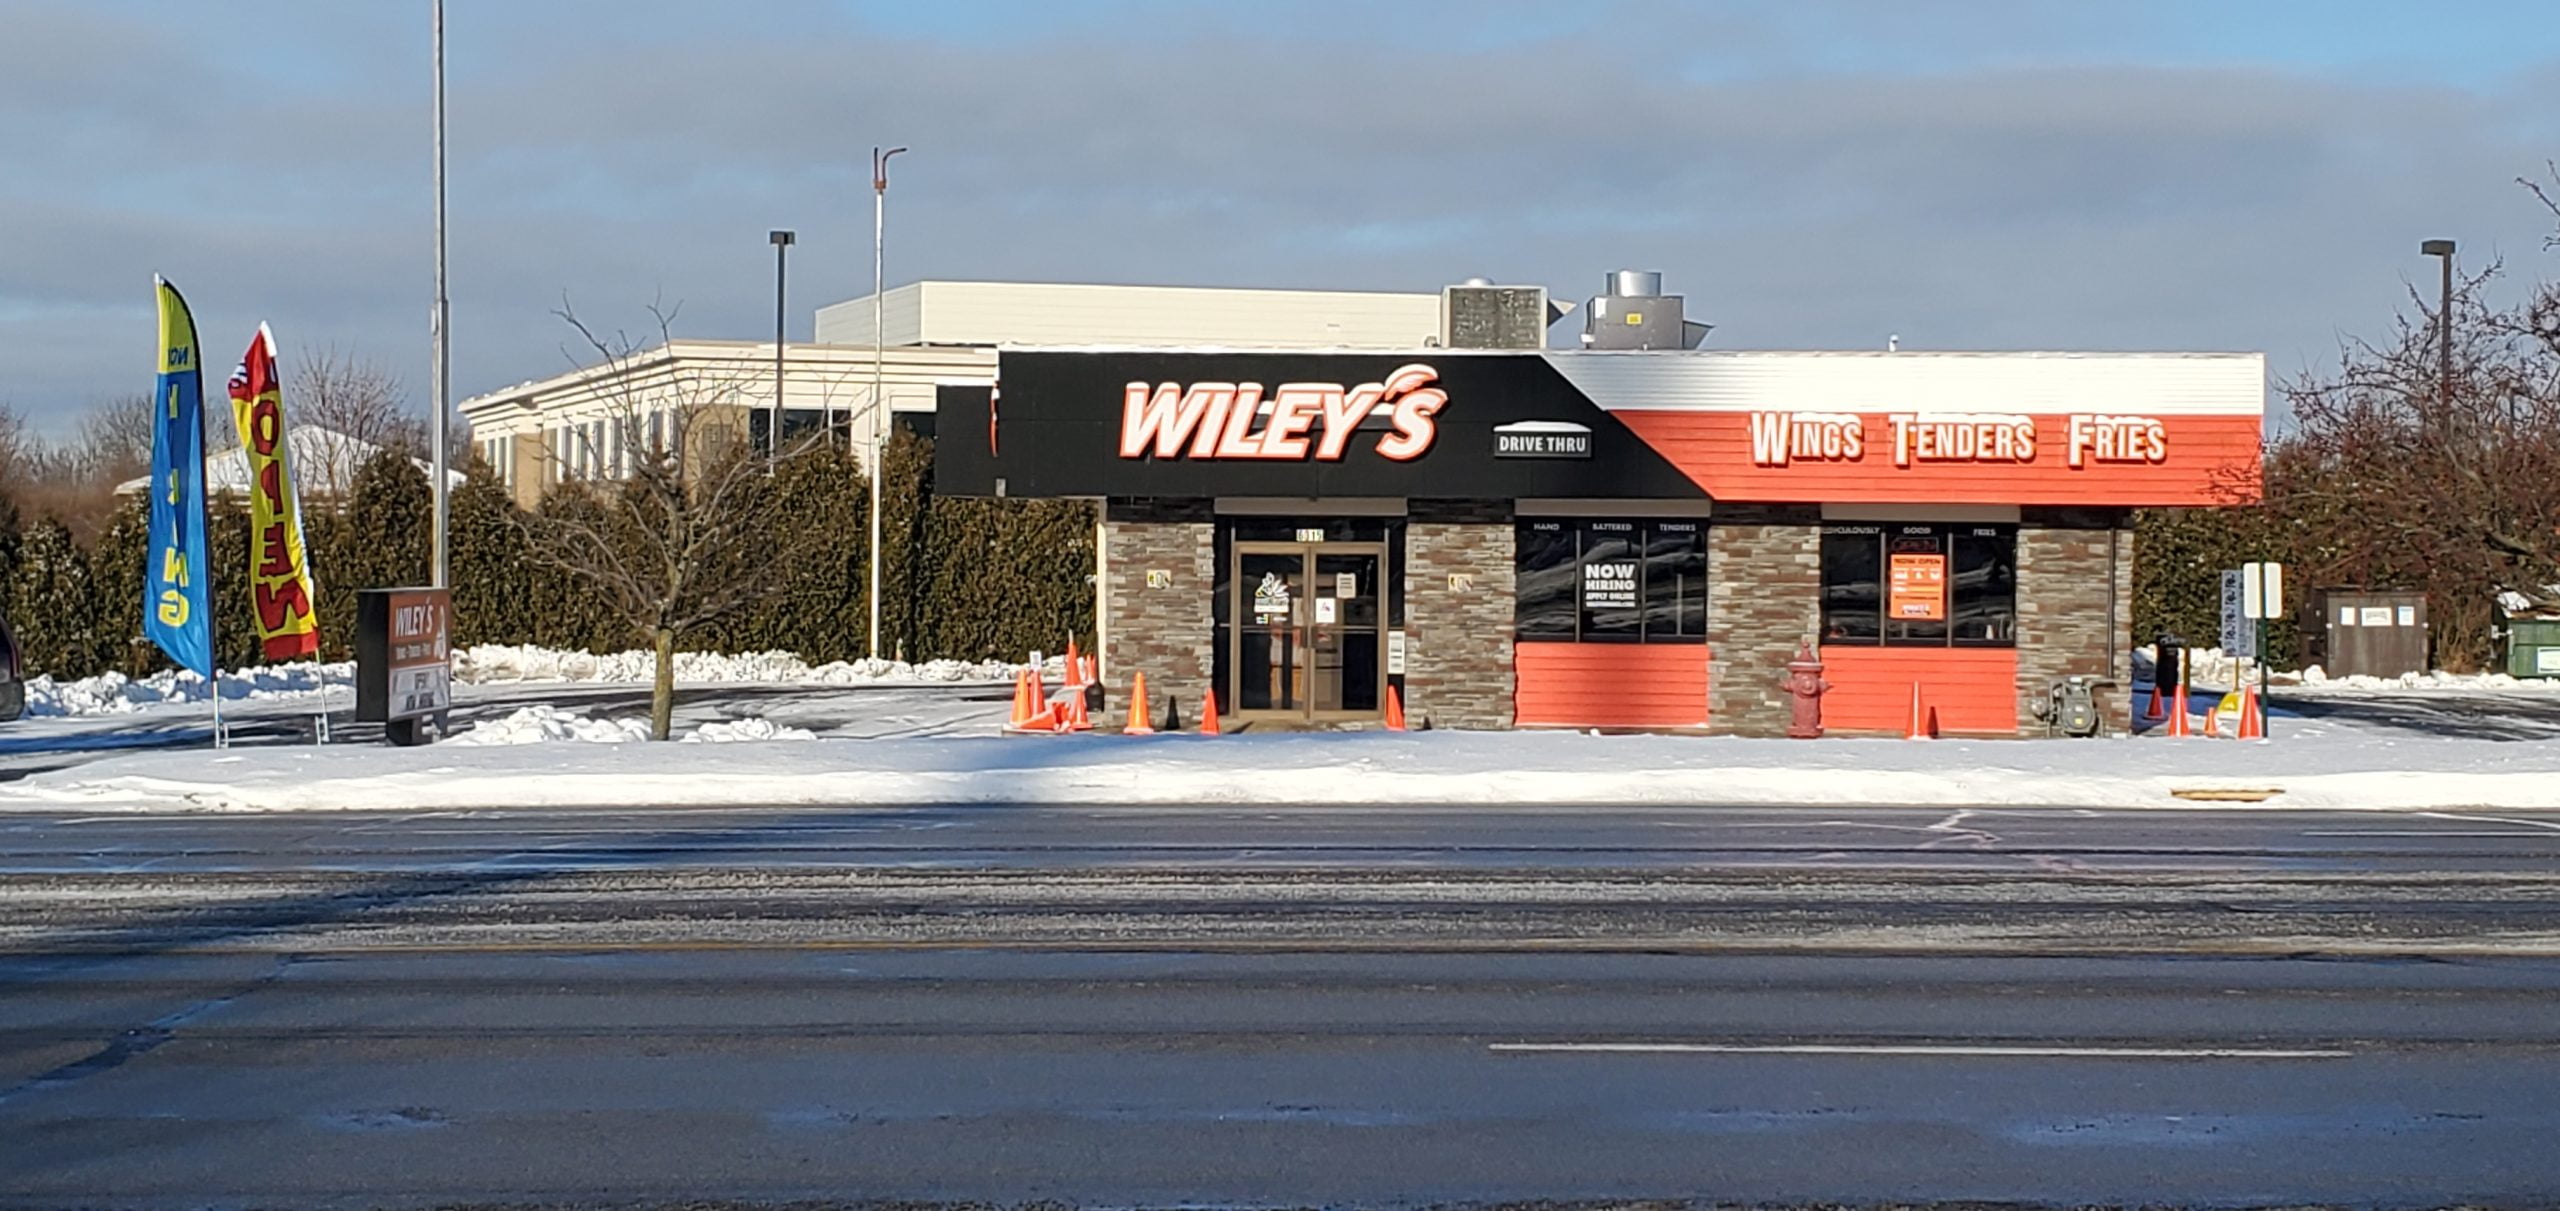 Wiley’s – Now Open for Business